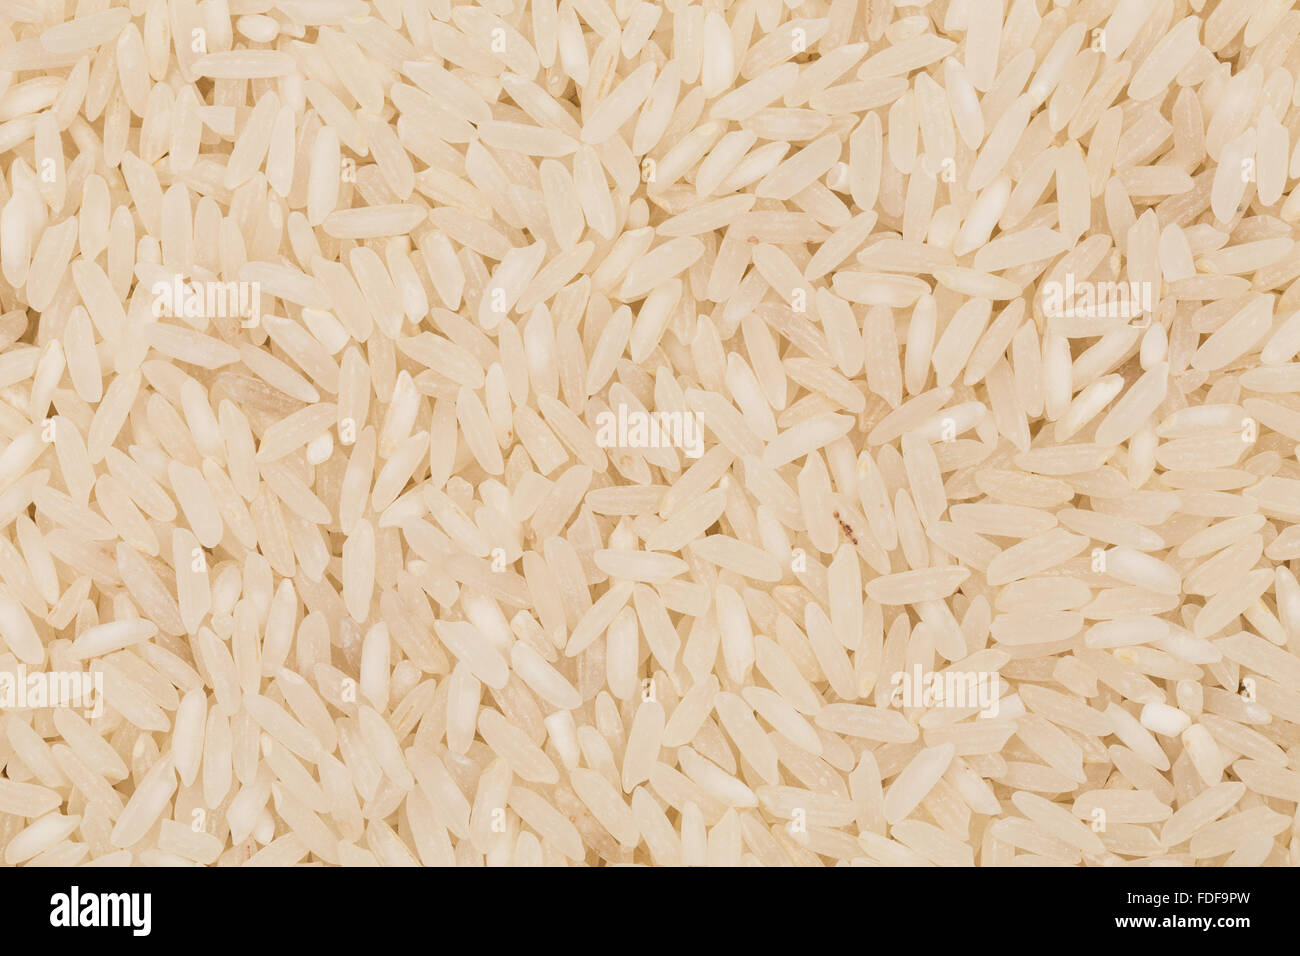 Asian white rice or uncooked white rice Stock Photo - Alamy